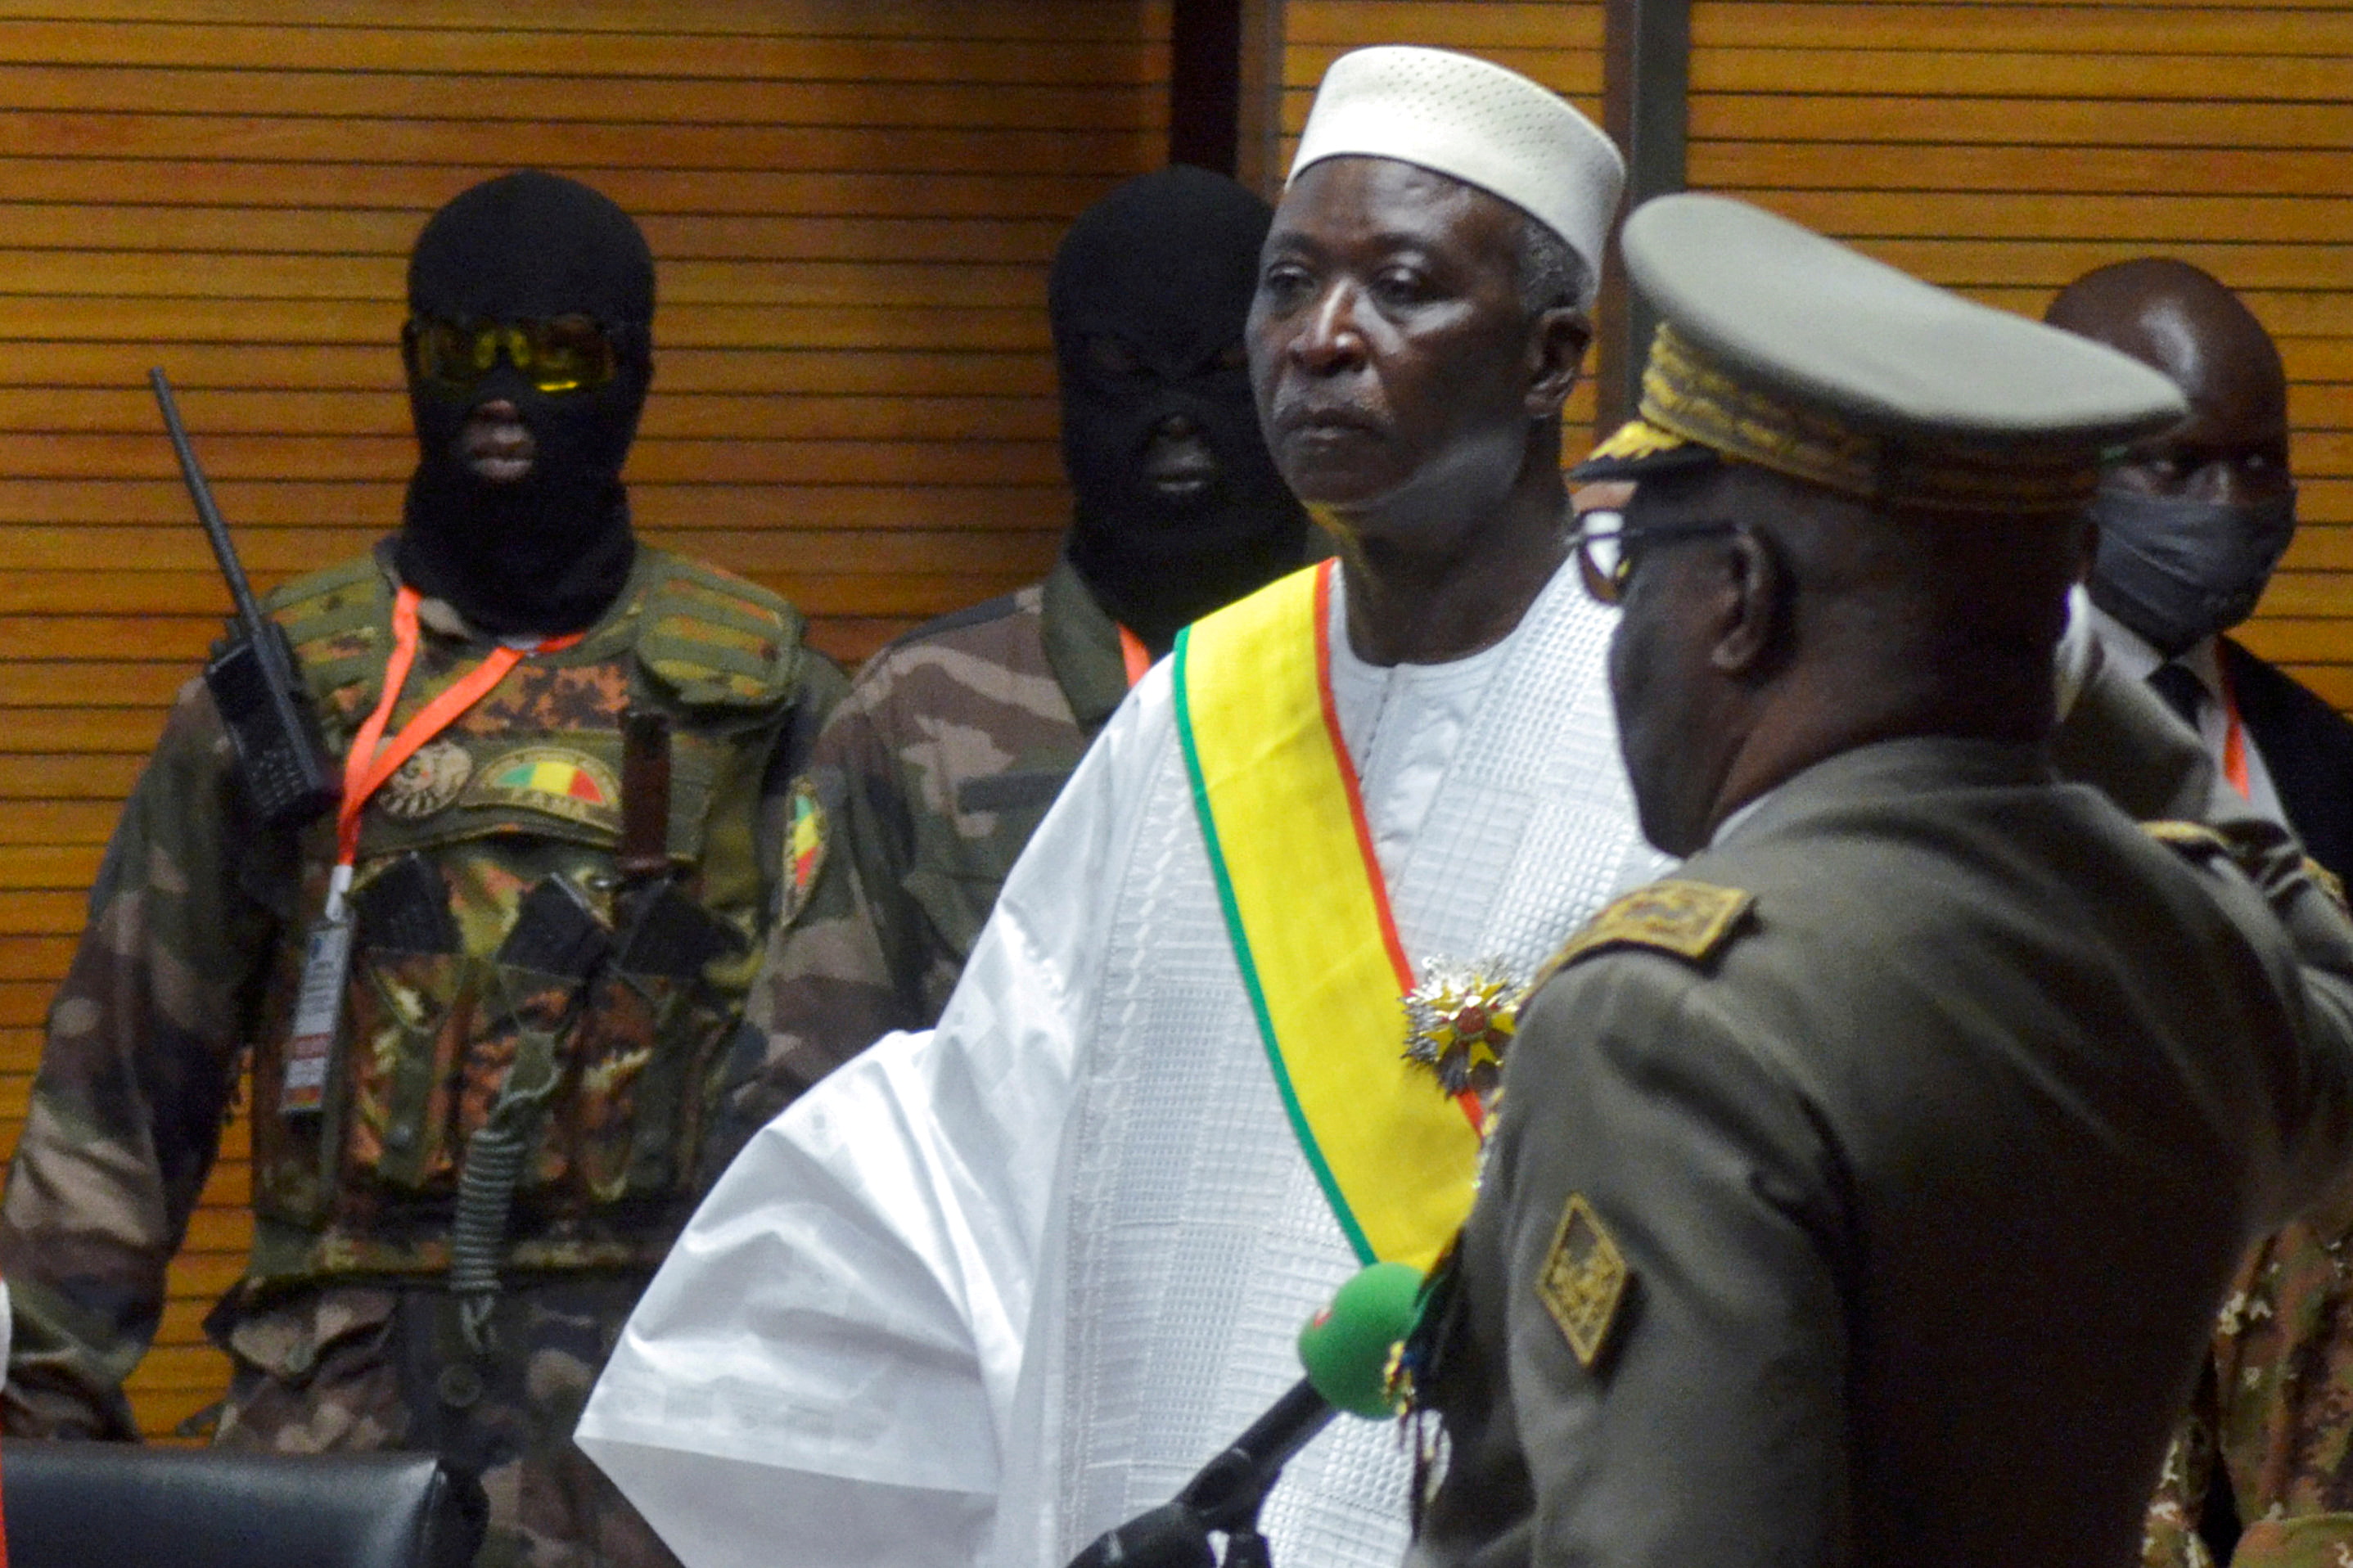 The new interim president of Mali Bah Ndaw is sworn in during the Inauguration ceremony in Bamako